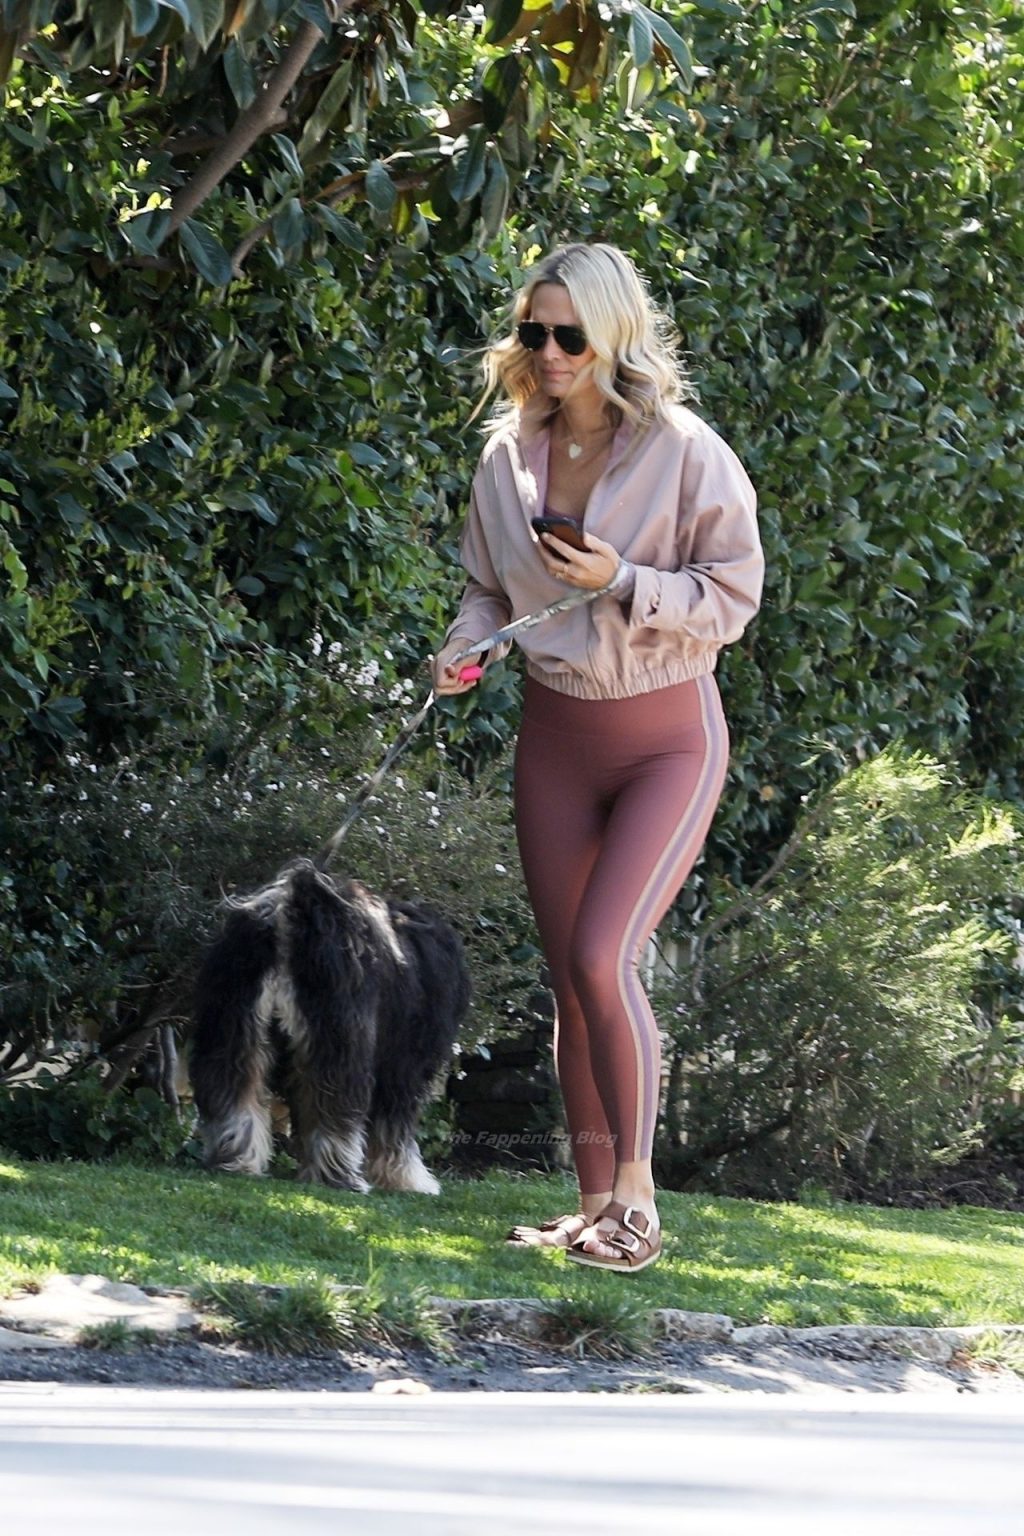 Molly Sims Snaps Selfies with Her Dog During a Morning Stroll (37 Photos)